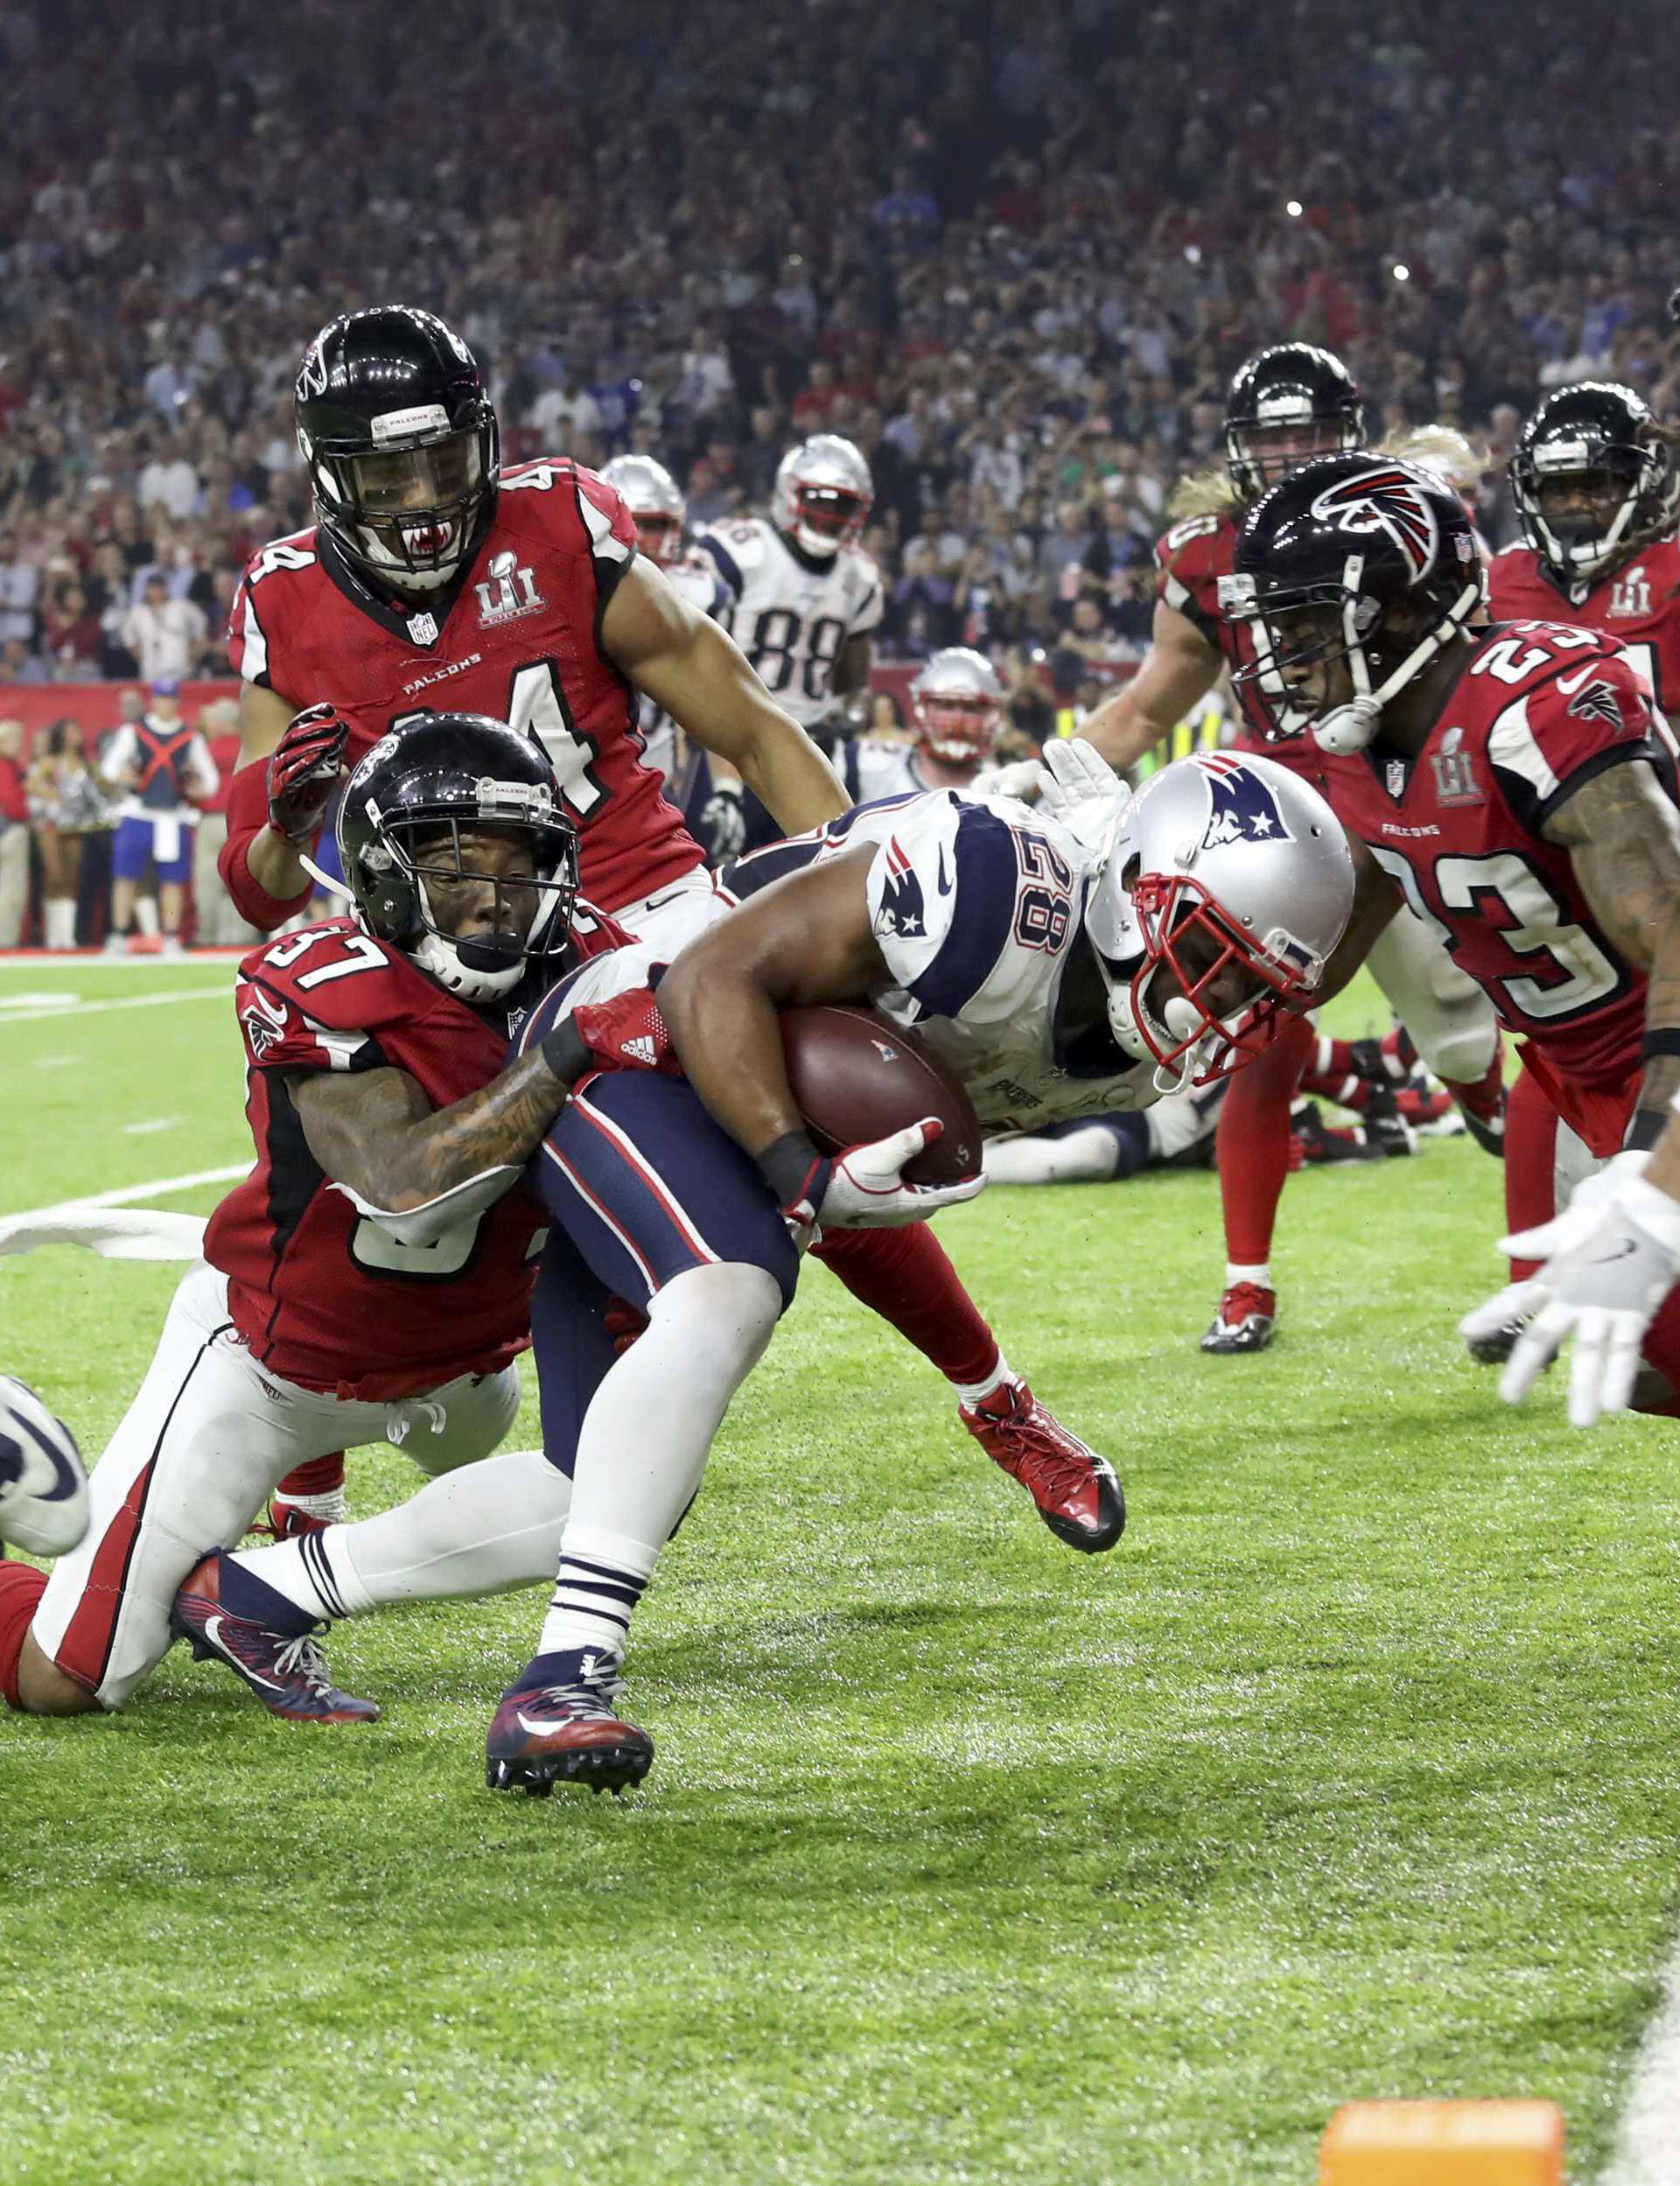 New England Patriots' James White scores a touchdown during overtime to win the Super Bowl LI against the Atlanta Falcons in Houston